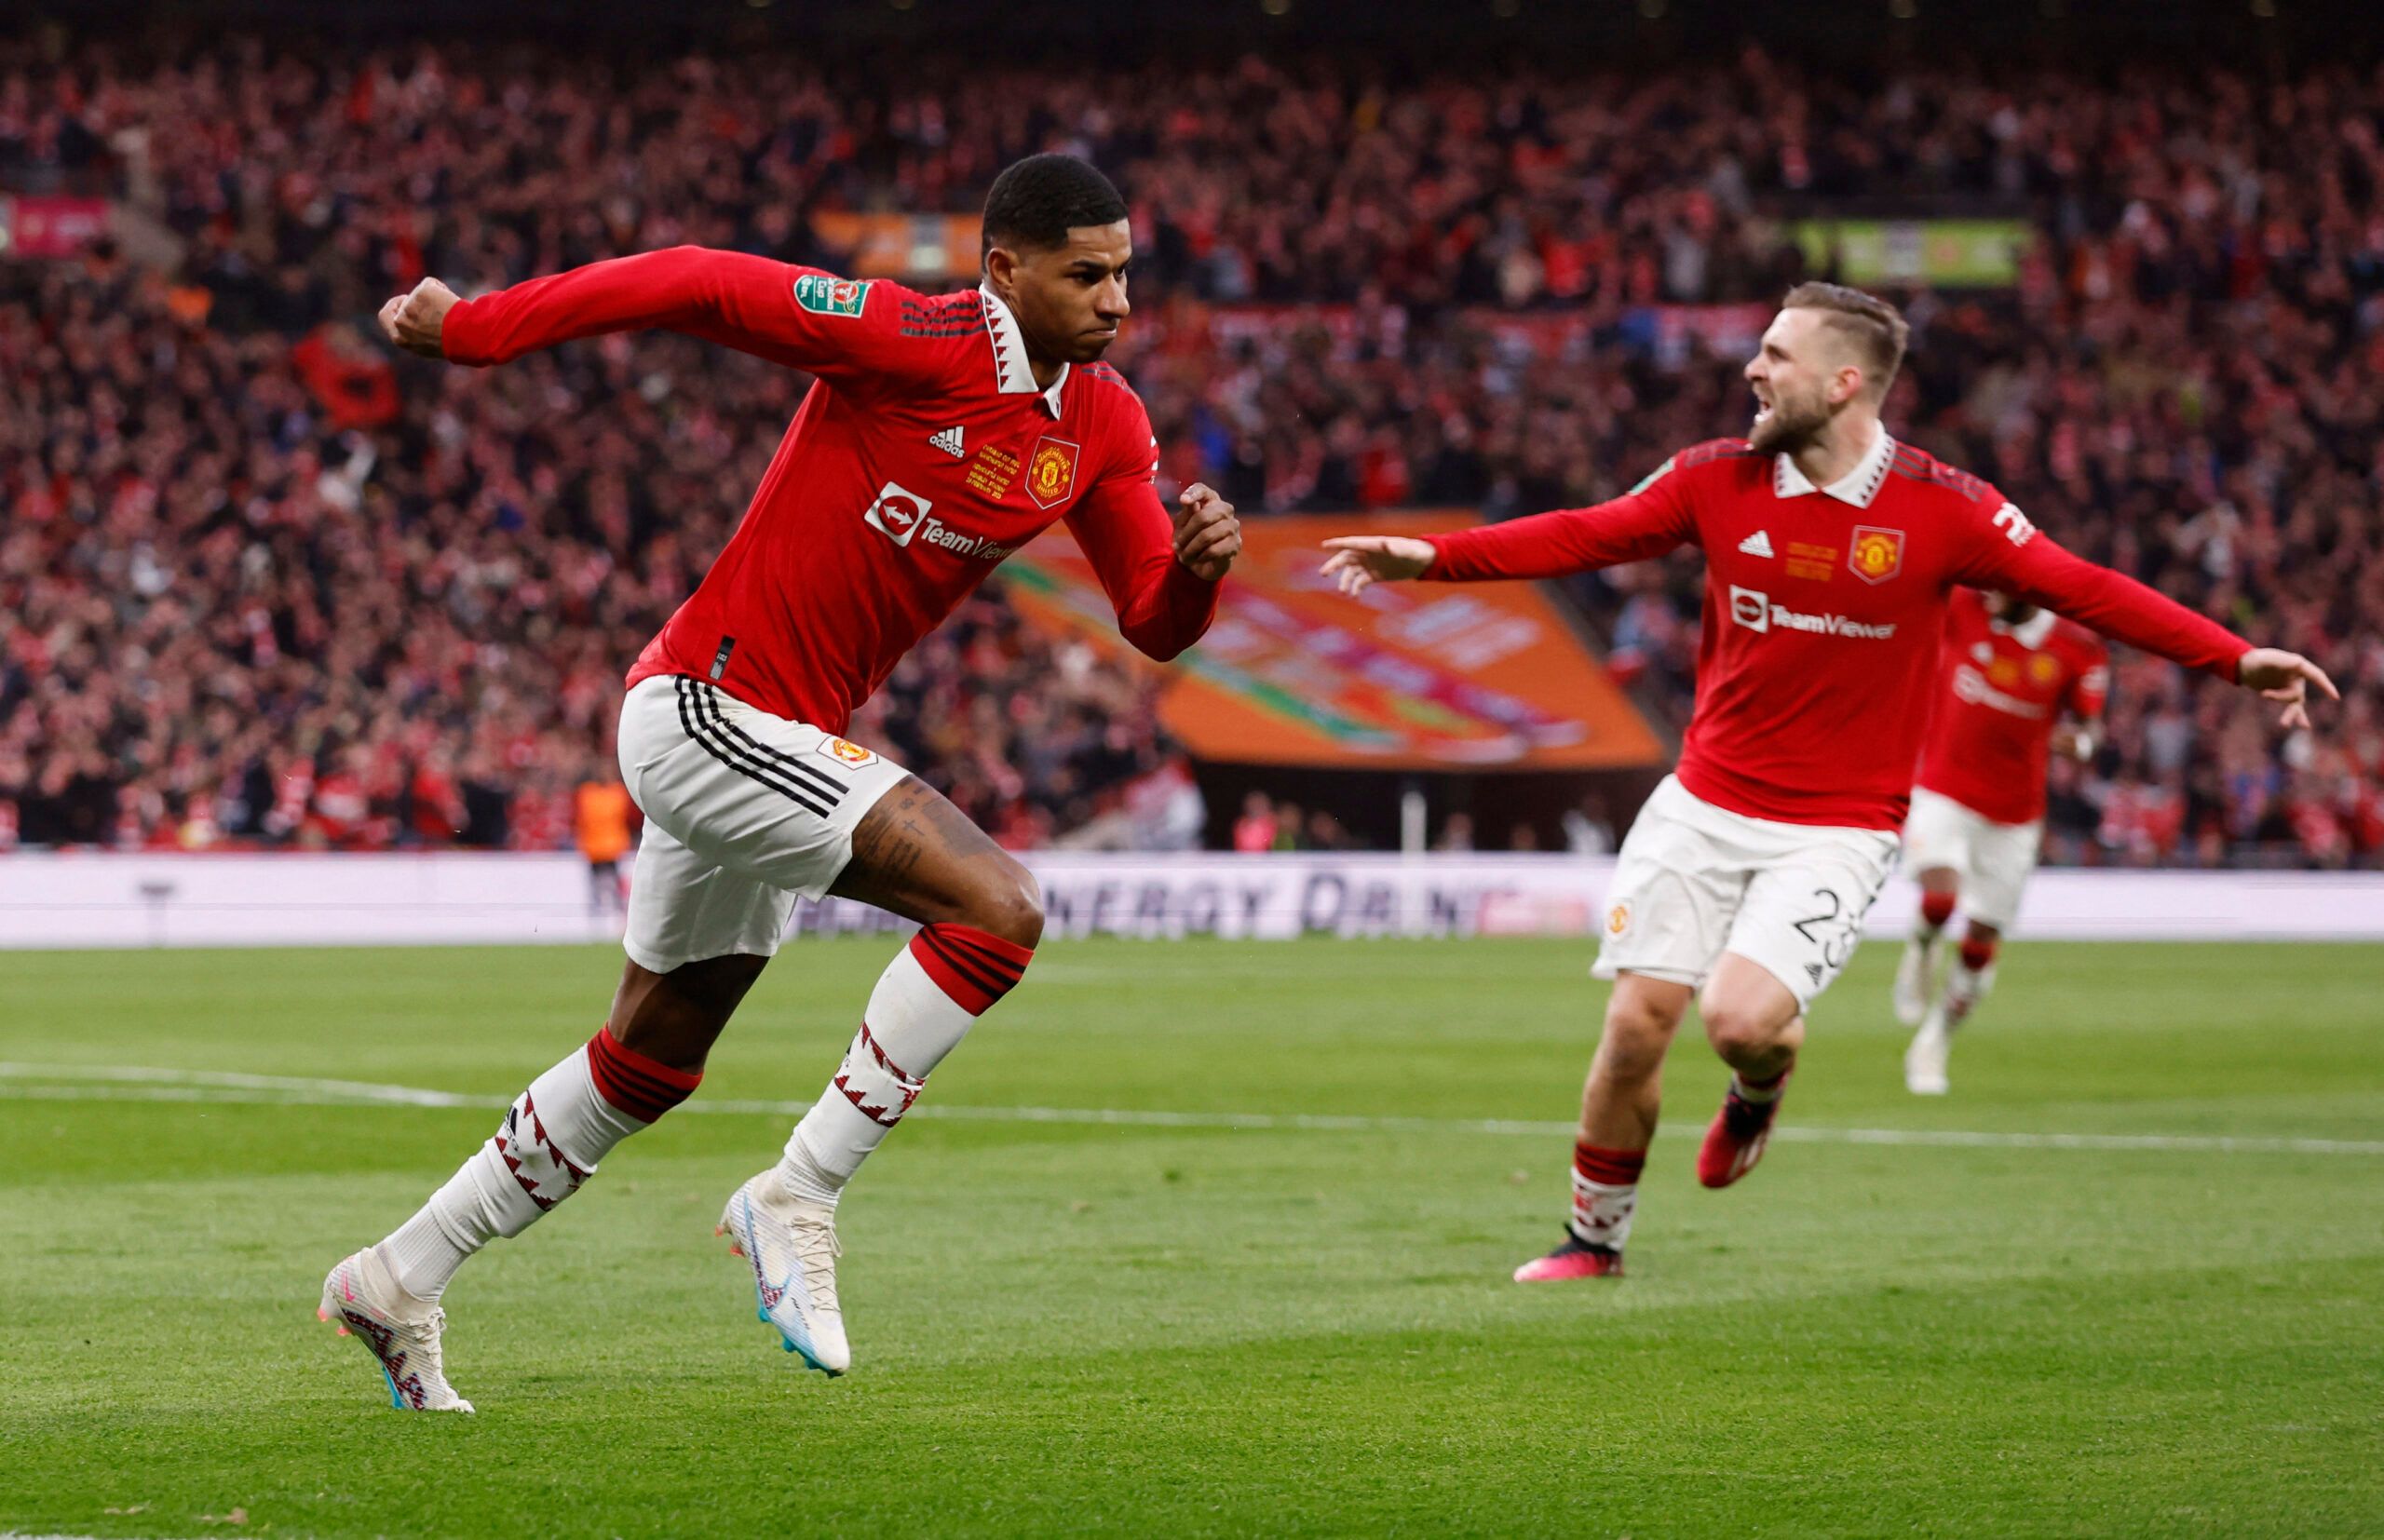 Soccer Football - Carabao Cup - Final - Manchester United v Newcastle United - Wembley Stadium, London, Britain - February 26, 2023  Manchester United's Marcus Rashford celebrates scoring their second goal Action Images via Reuters/Andrew Couldridge EDITORIAL USE ONLY. No use with unauthorized audio, video, data, fixture lists, club/league logos or 'live' services. Online in-match use limited to 75 images, no video emulation. No use in betting, games or single club /league/player publications.  